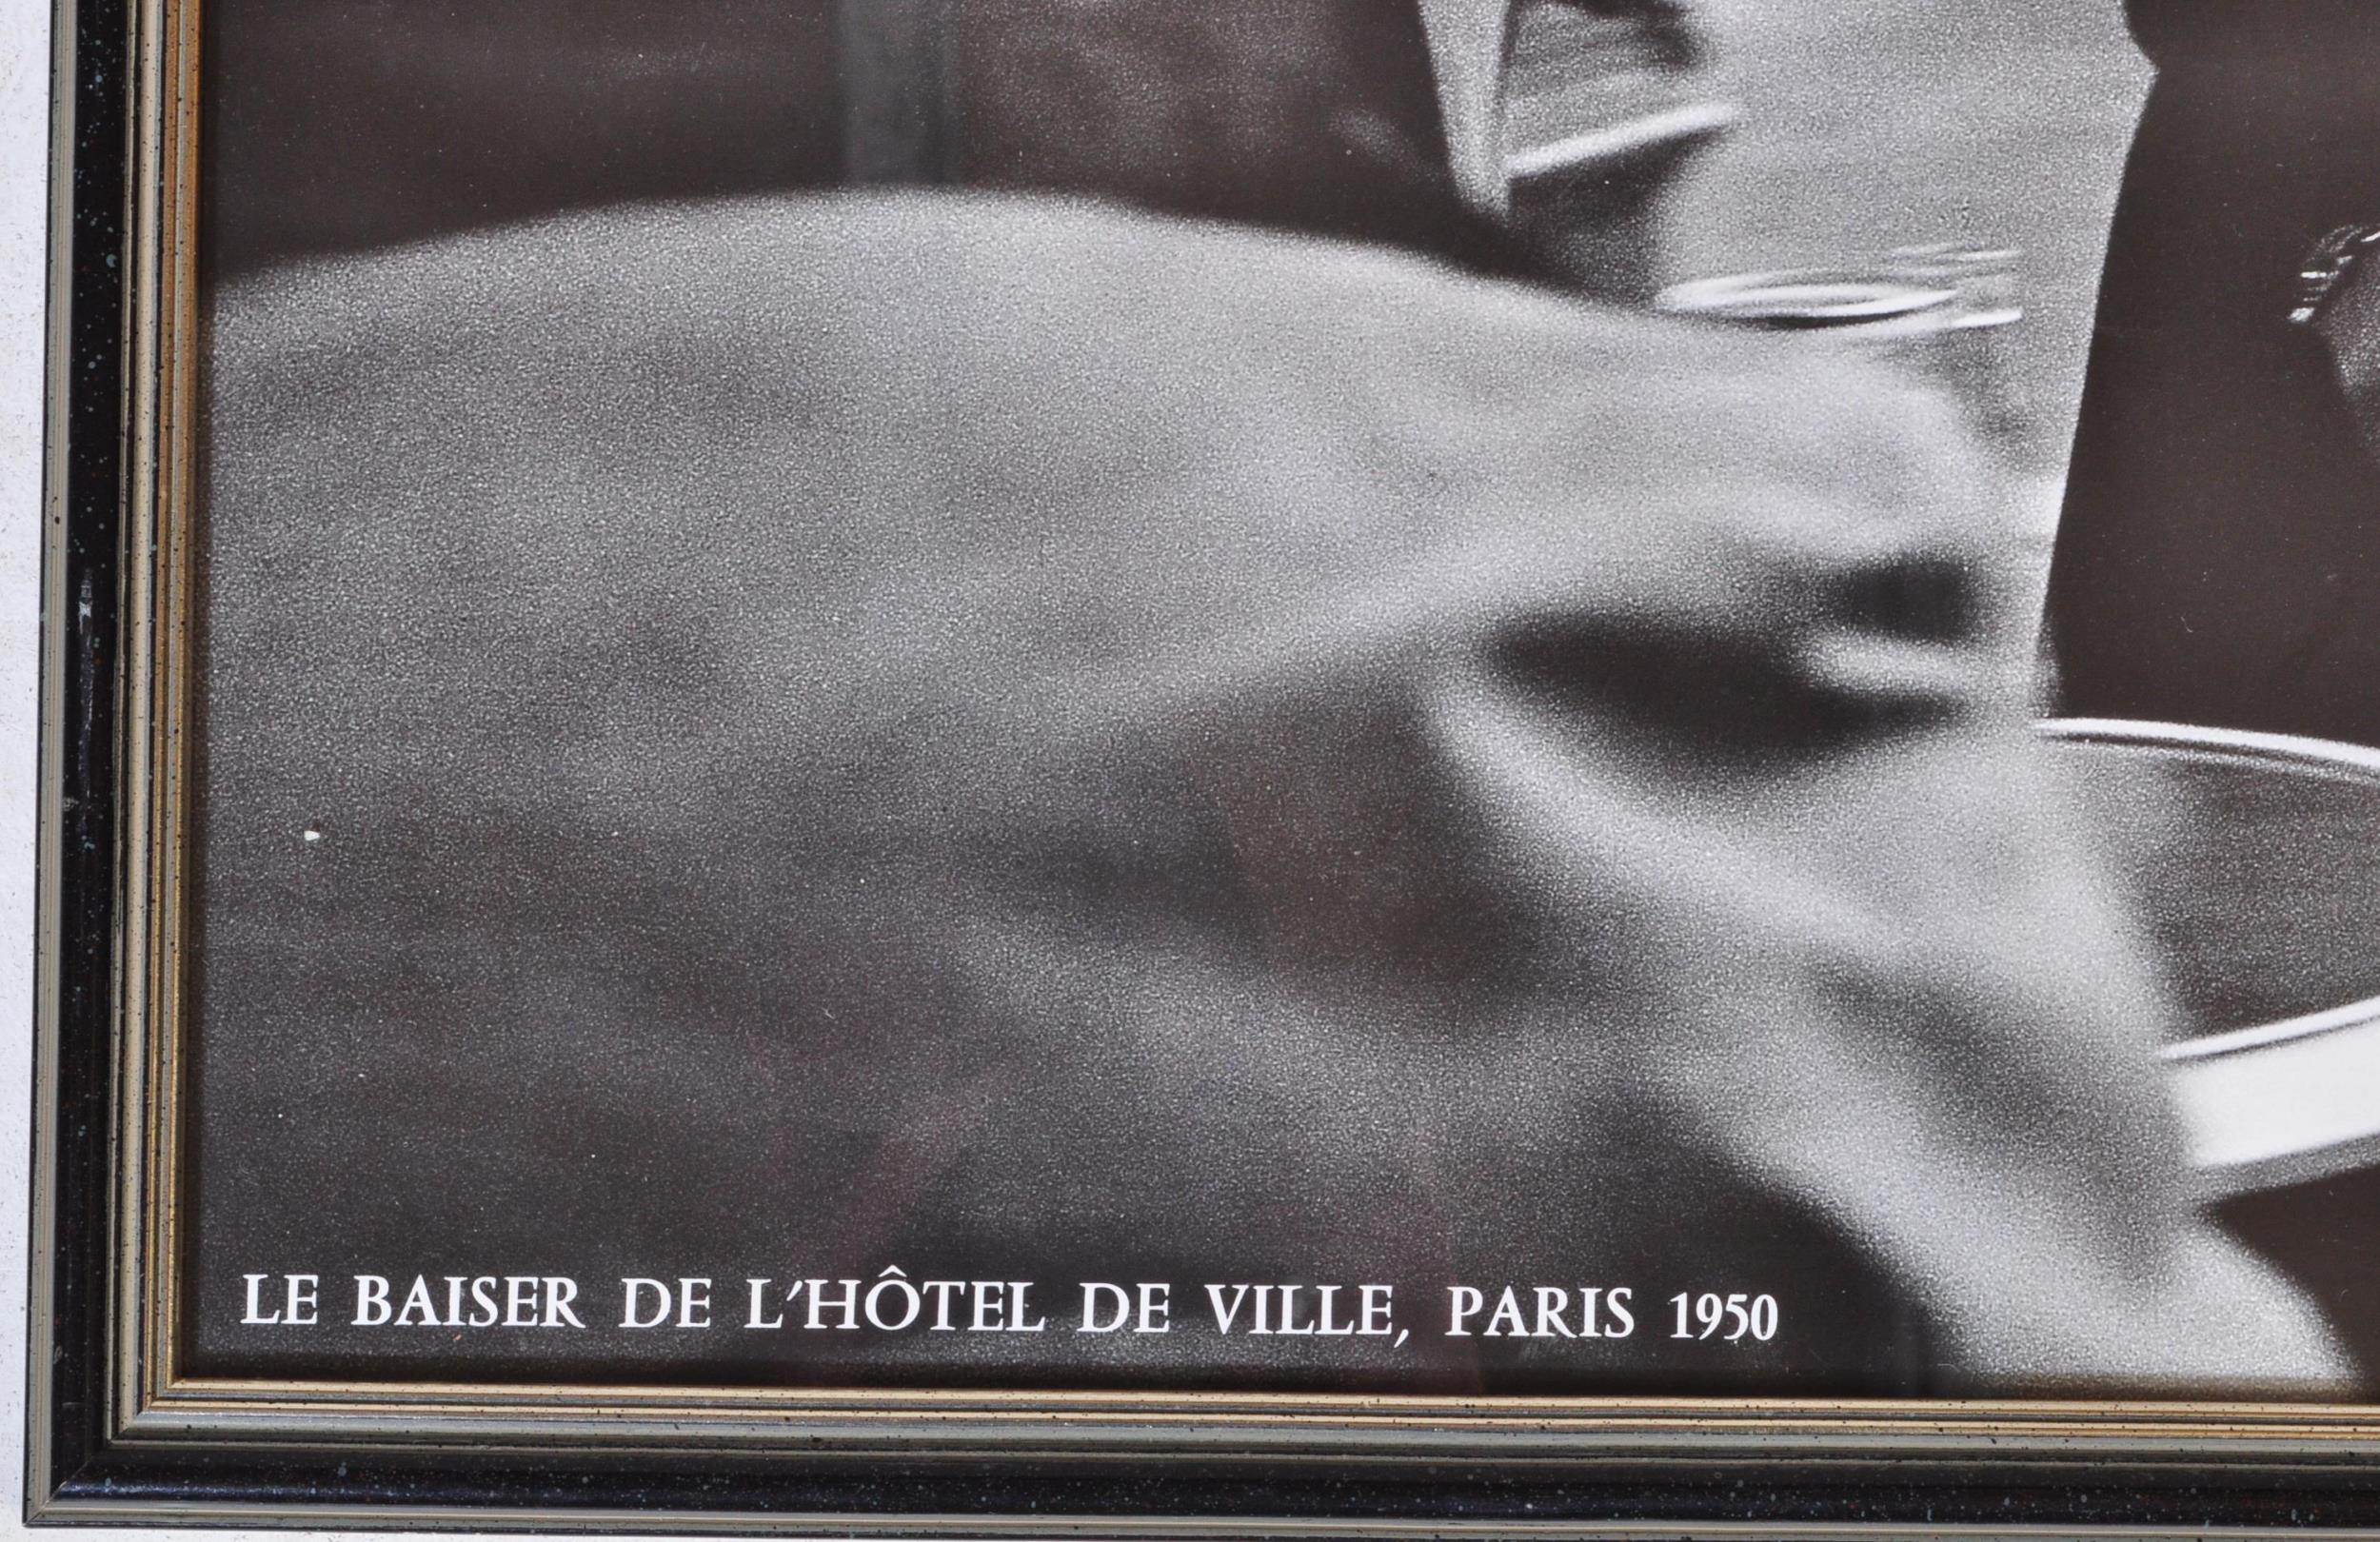 ROBERT DOISNEAU - KISS BY THE TOWN HALL - FRAMED POSTER - Image 3 of 4